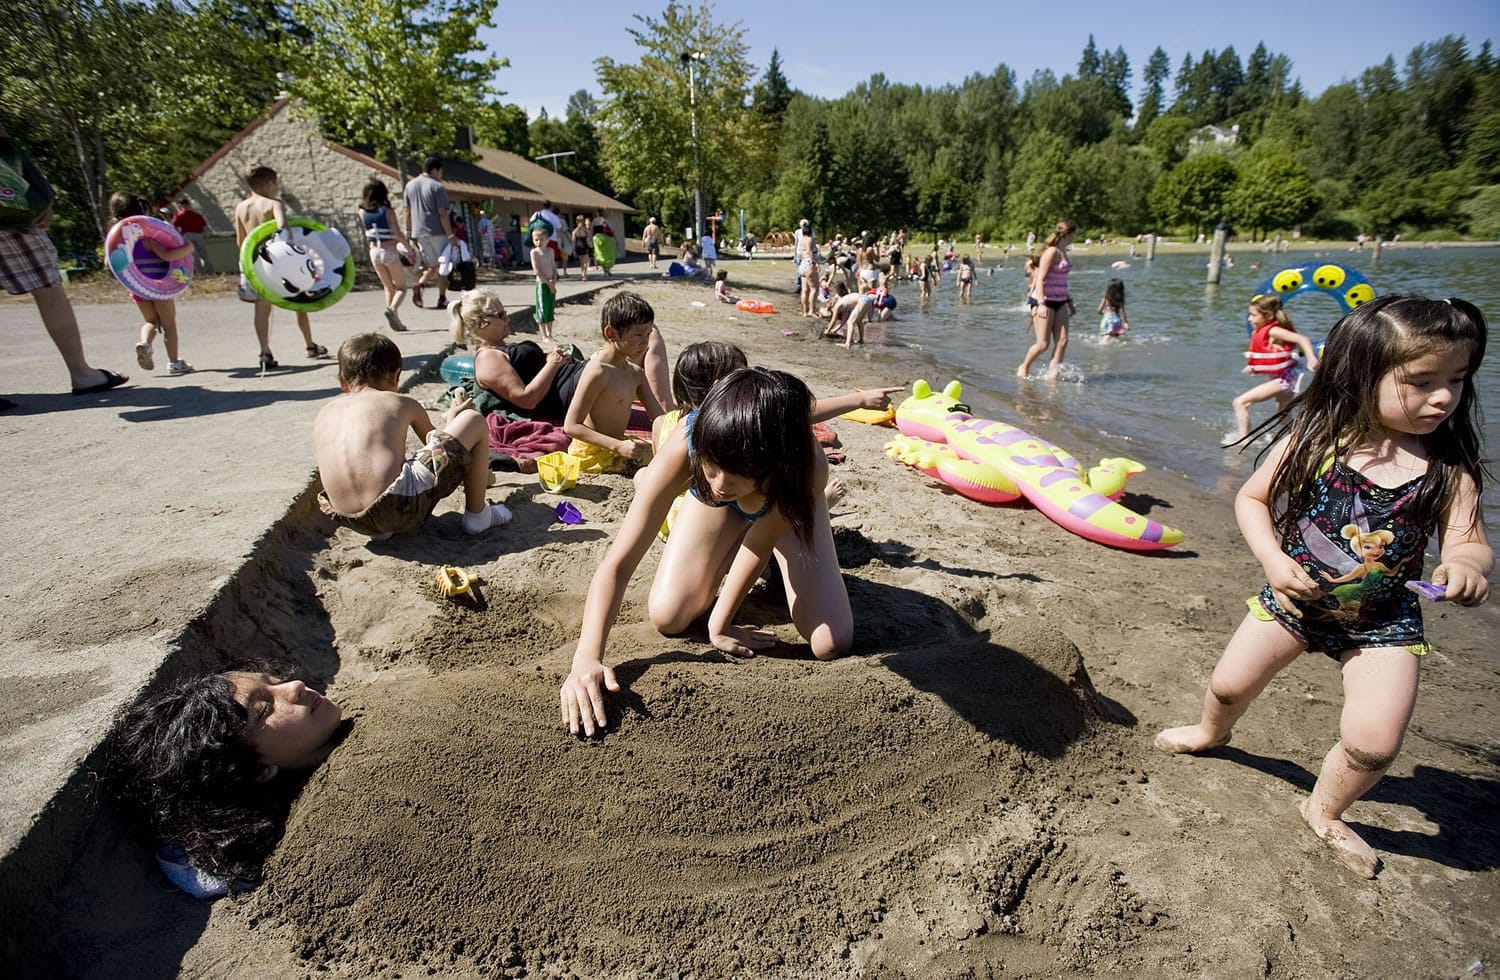 Fatima Barrios, 11, from Vancouver, is buried by her cousins Kimberly Hernandez , 14, and Jolie Maldonado, 3, both visiting from California, at Klineline Pond at Salmon Creek Park, Thursday, June 24, 2010.